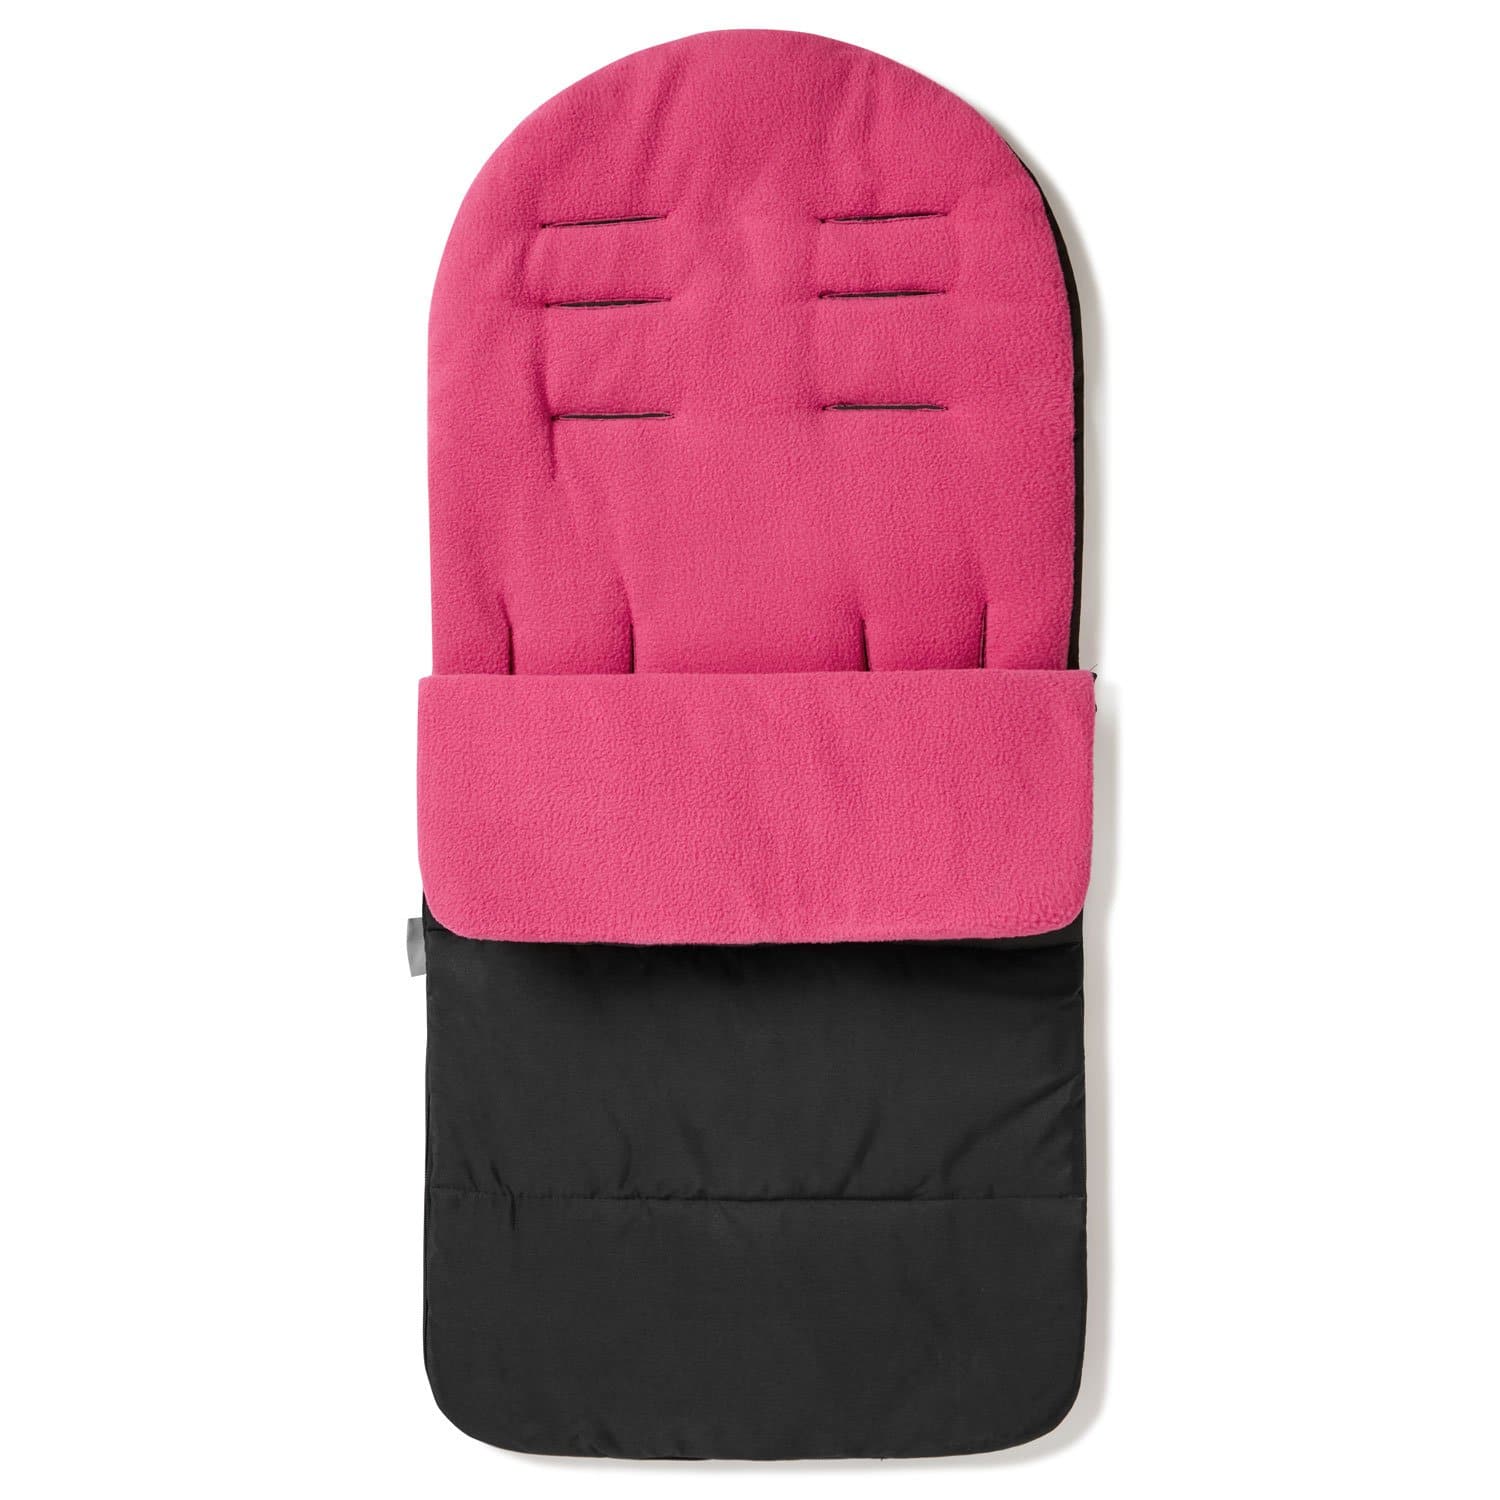 Premium Footmuff / Cosy Toes Compatible with iCandy - Pink Rose / Fits All Models | For Your Little One